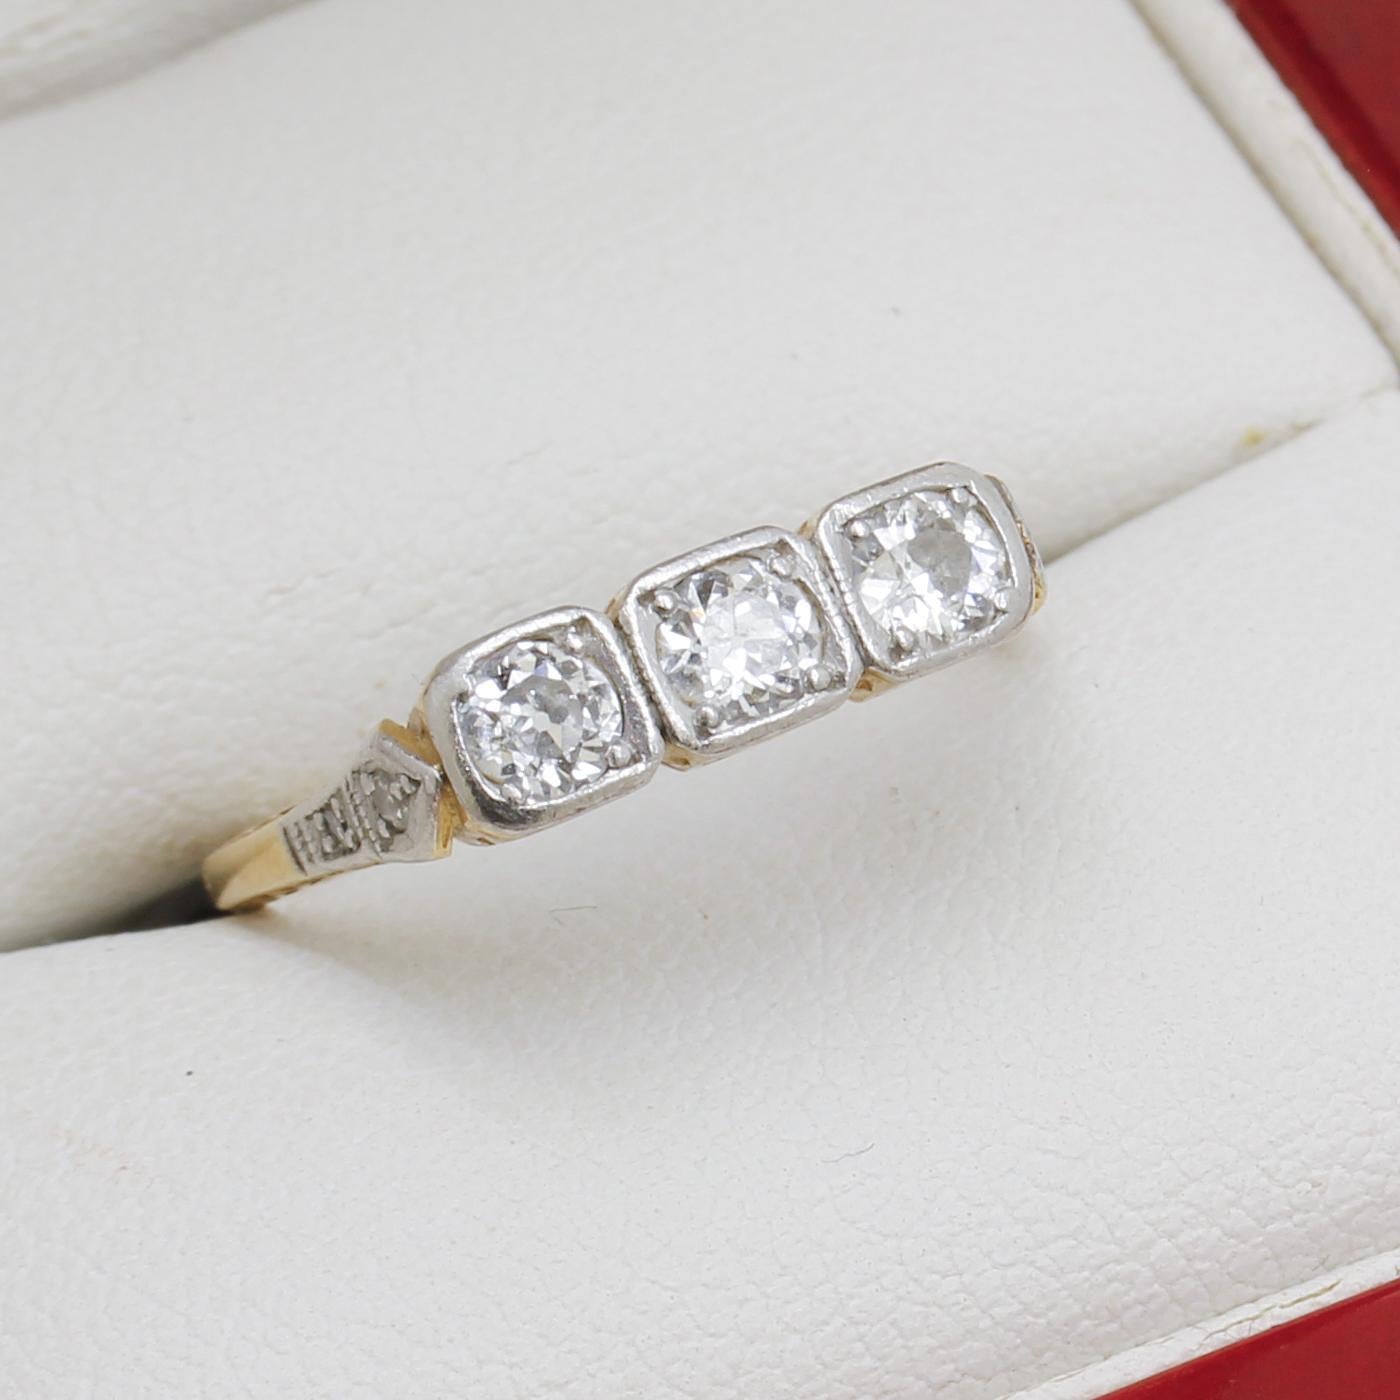 14ct yellow gold and platinum ring, narrow, low half round, tapered shank, with open back, up swept shoulders, polished finish, stamped (PLAT).
The Item Contains:
Three bead set natural old cut diamonds, clarity is 